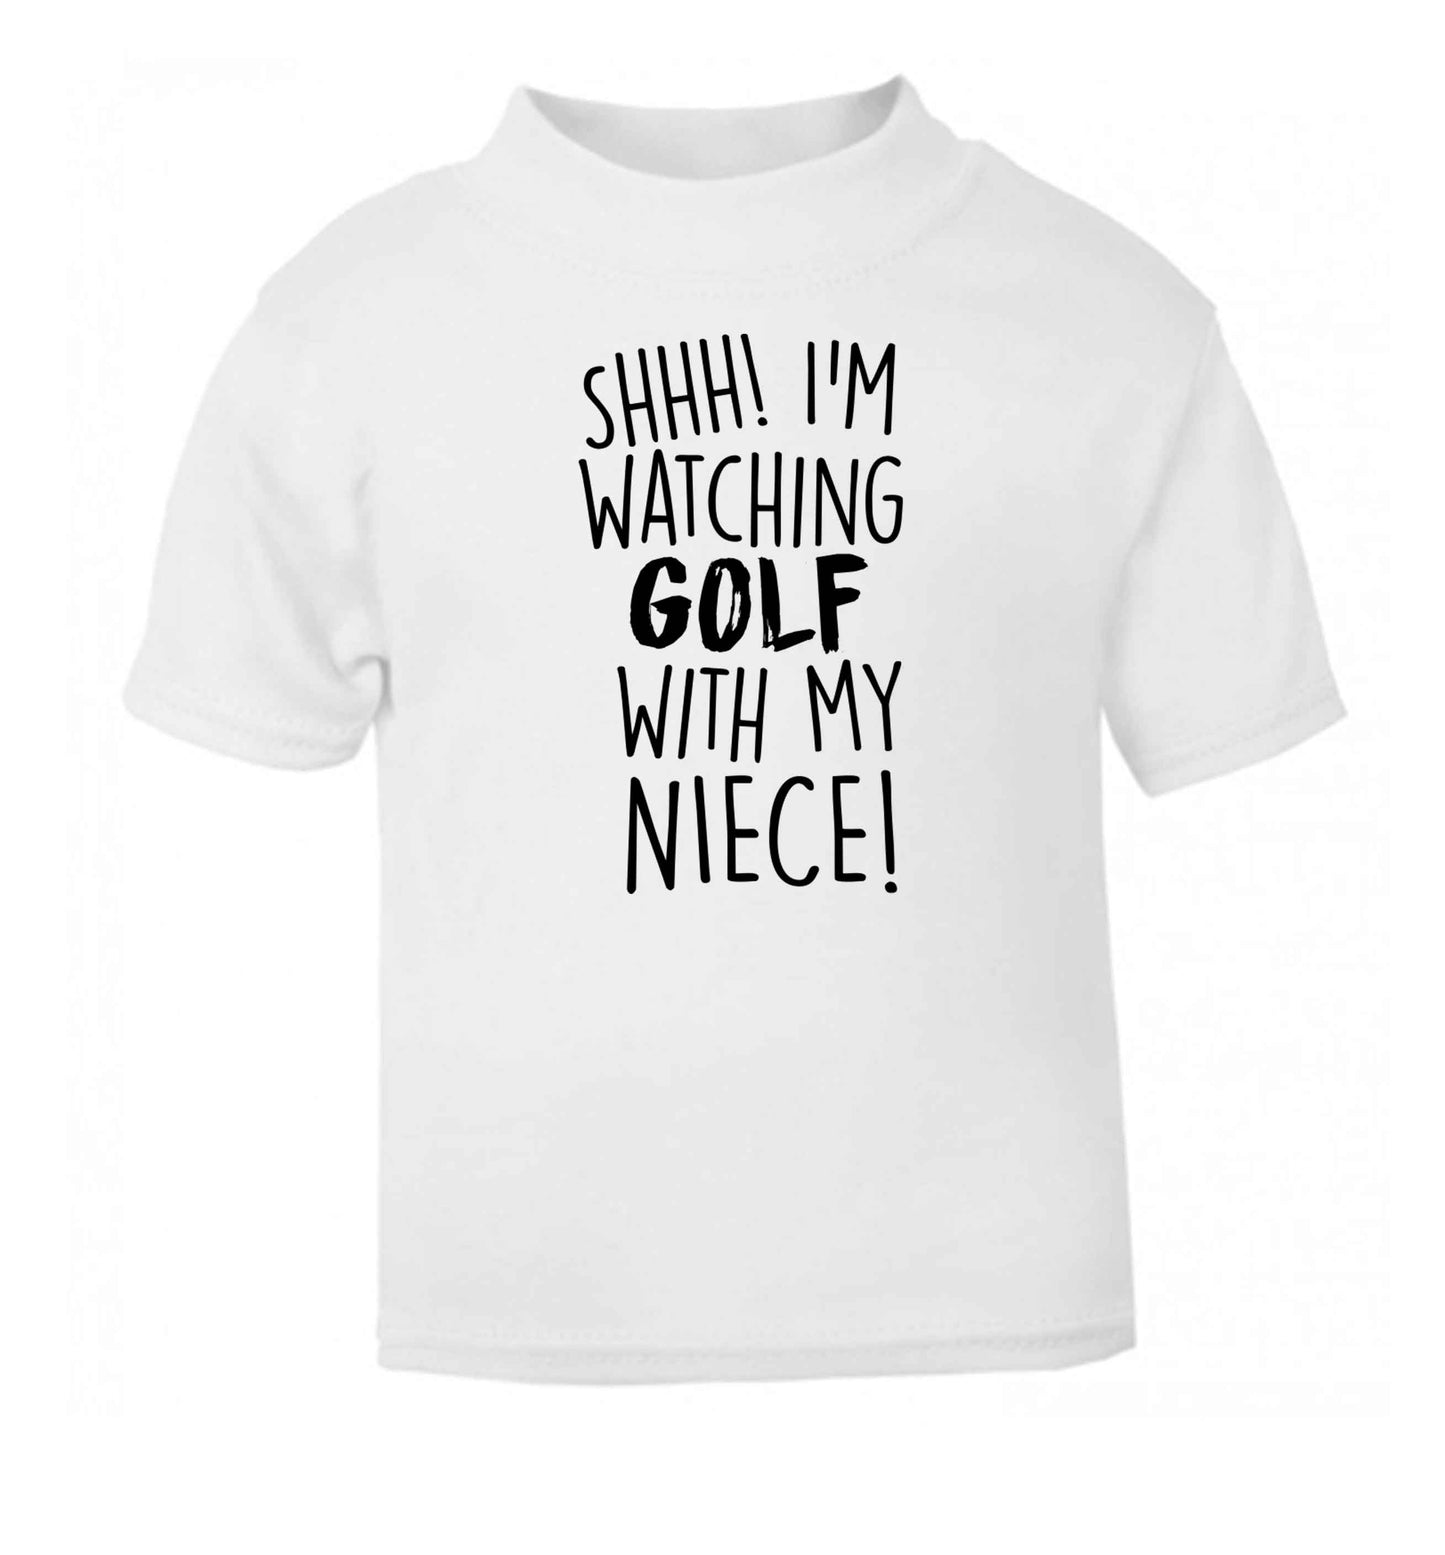 Shh I'm watching golf with my niece white Baby Toddler Tshirt 2 Years